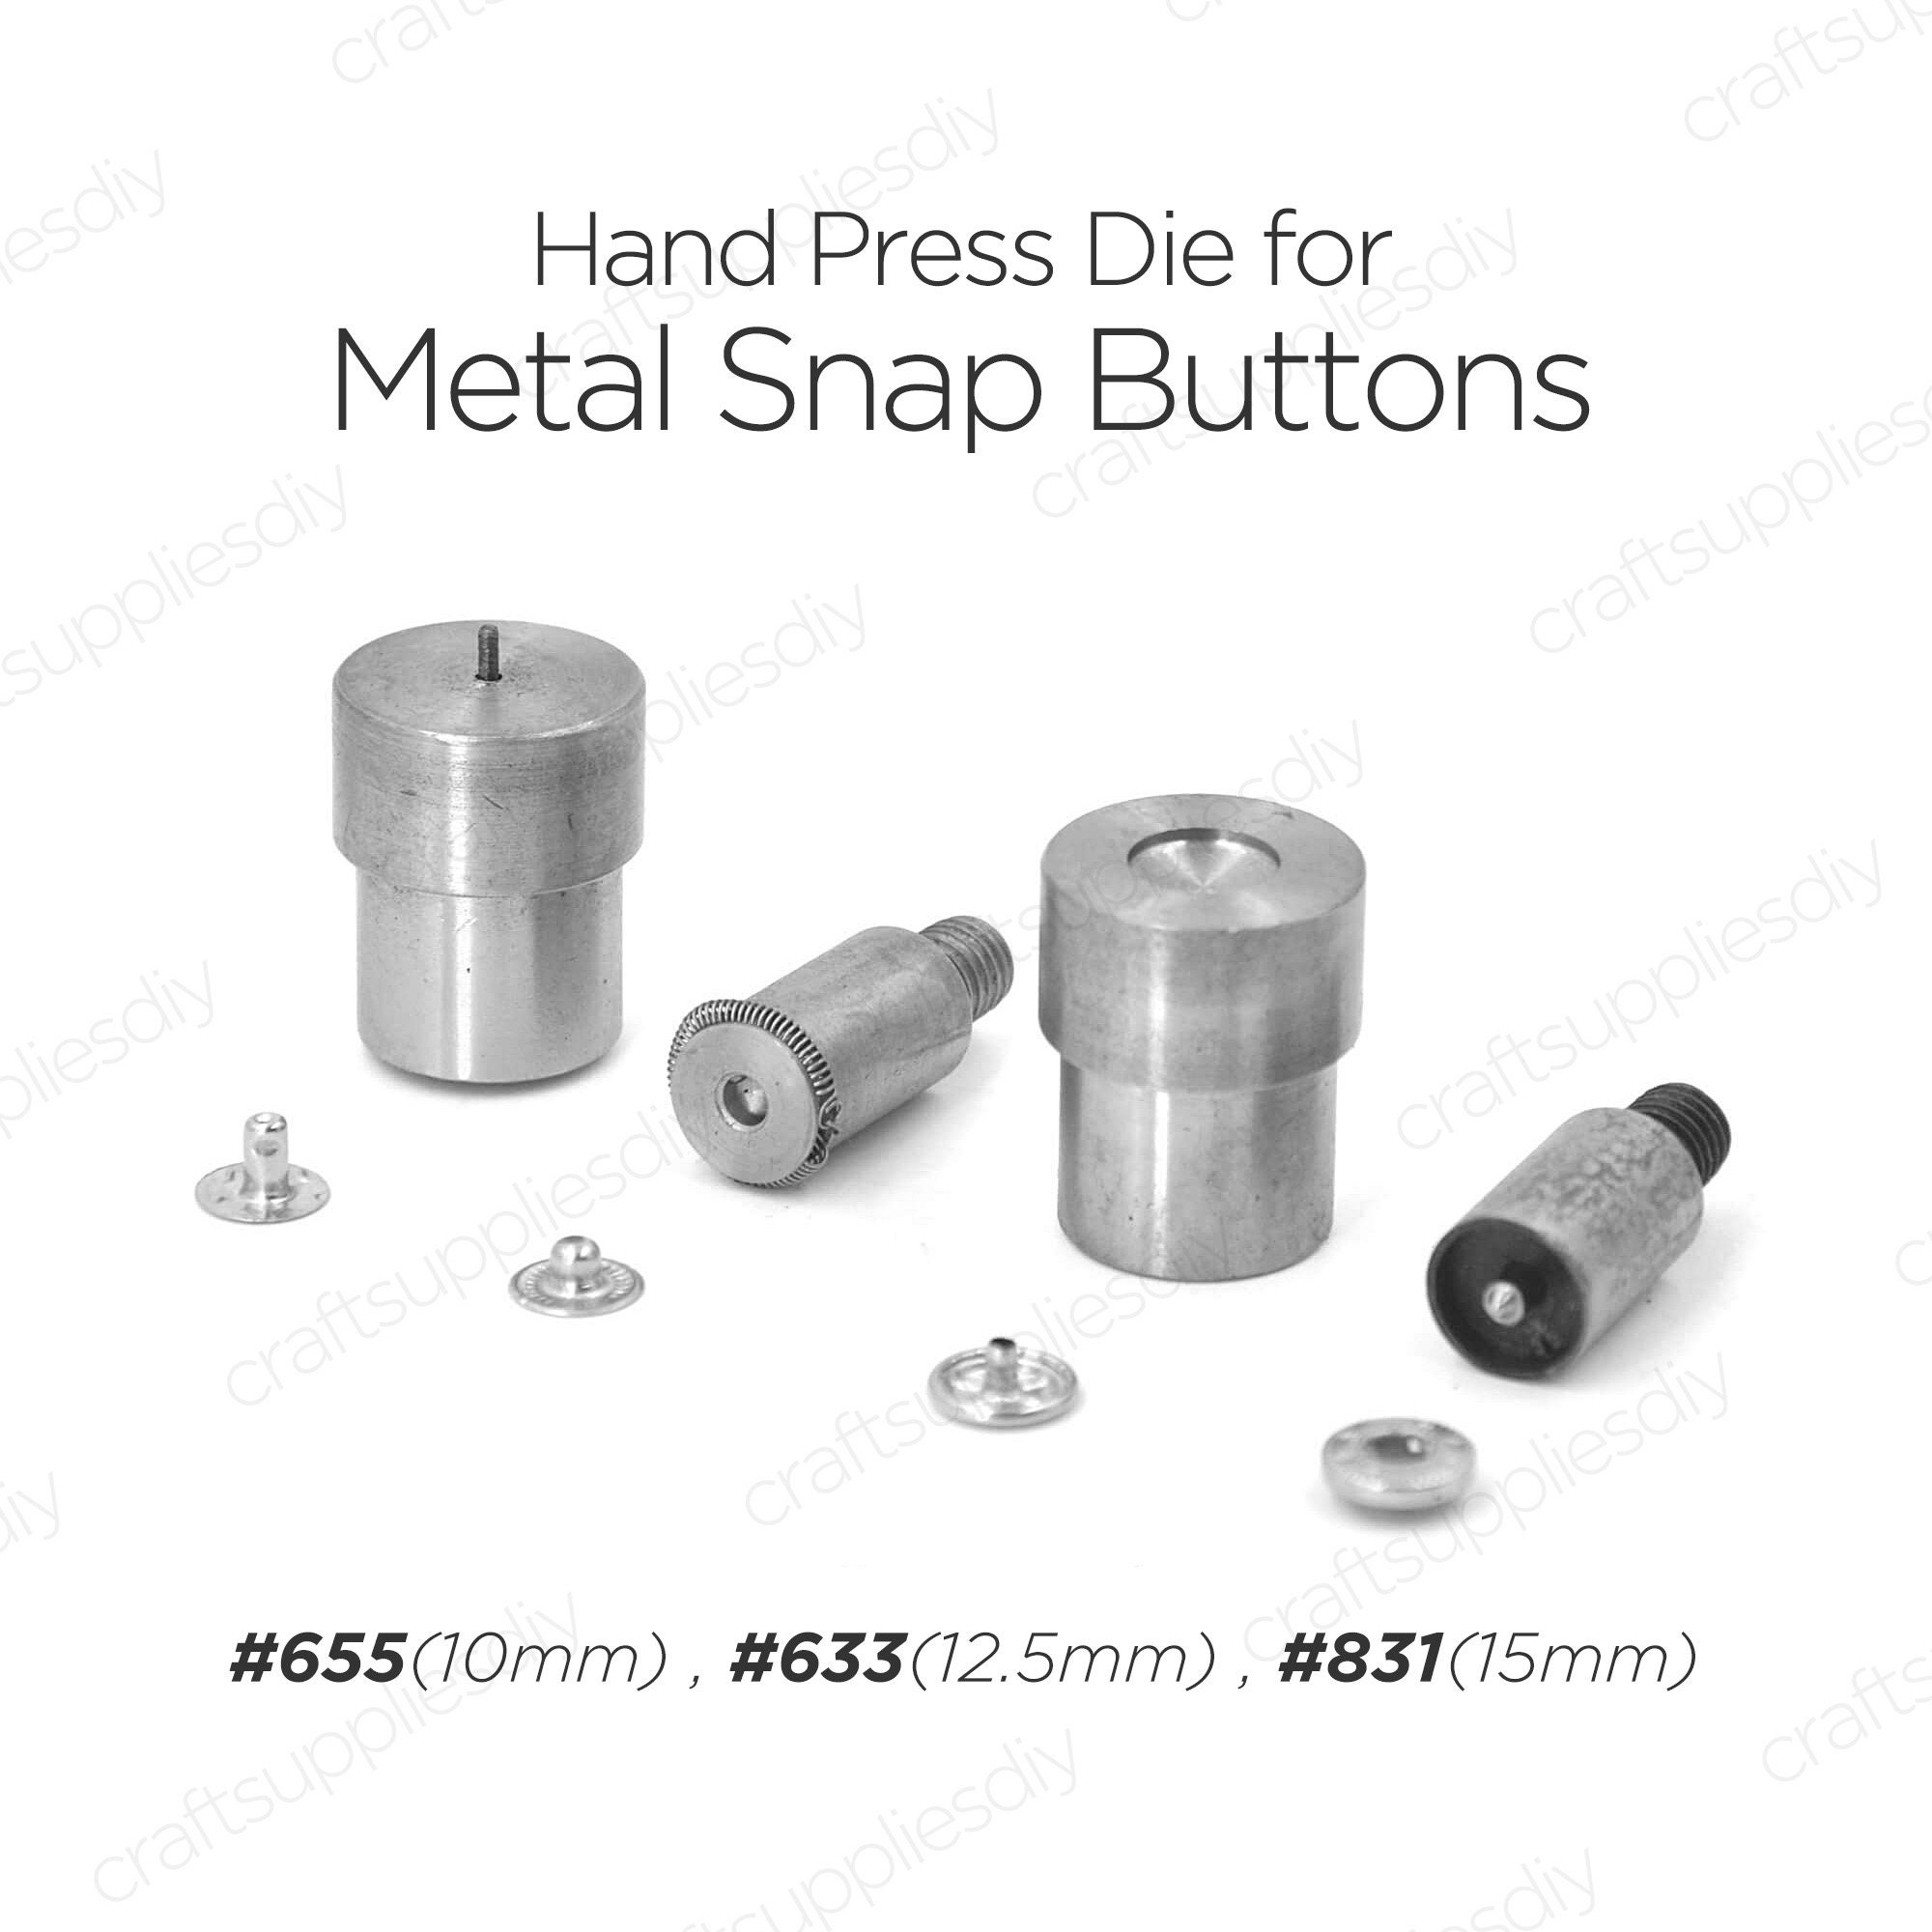 Hand Press Die for Metal Snap Fasteners Setting Tools for Press